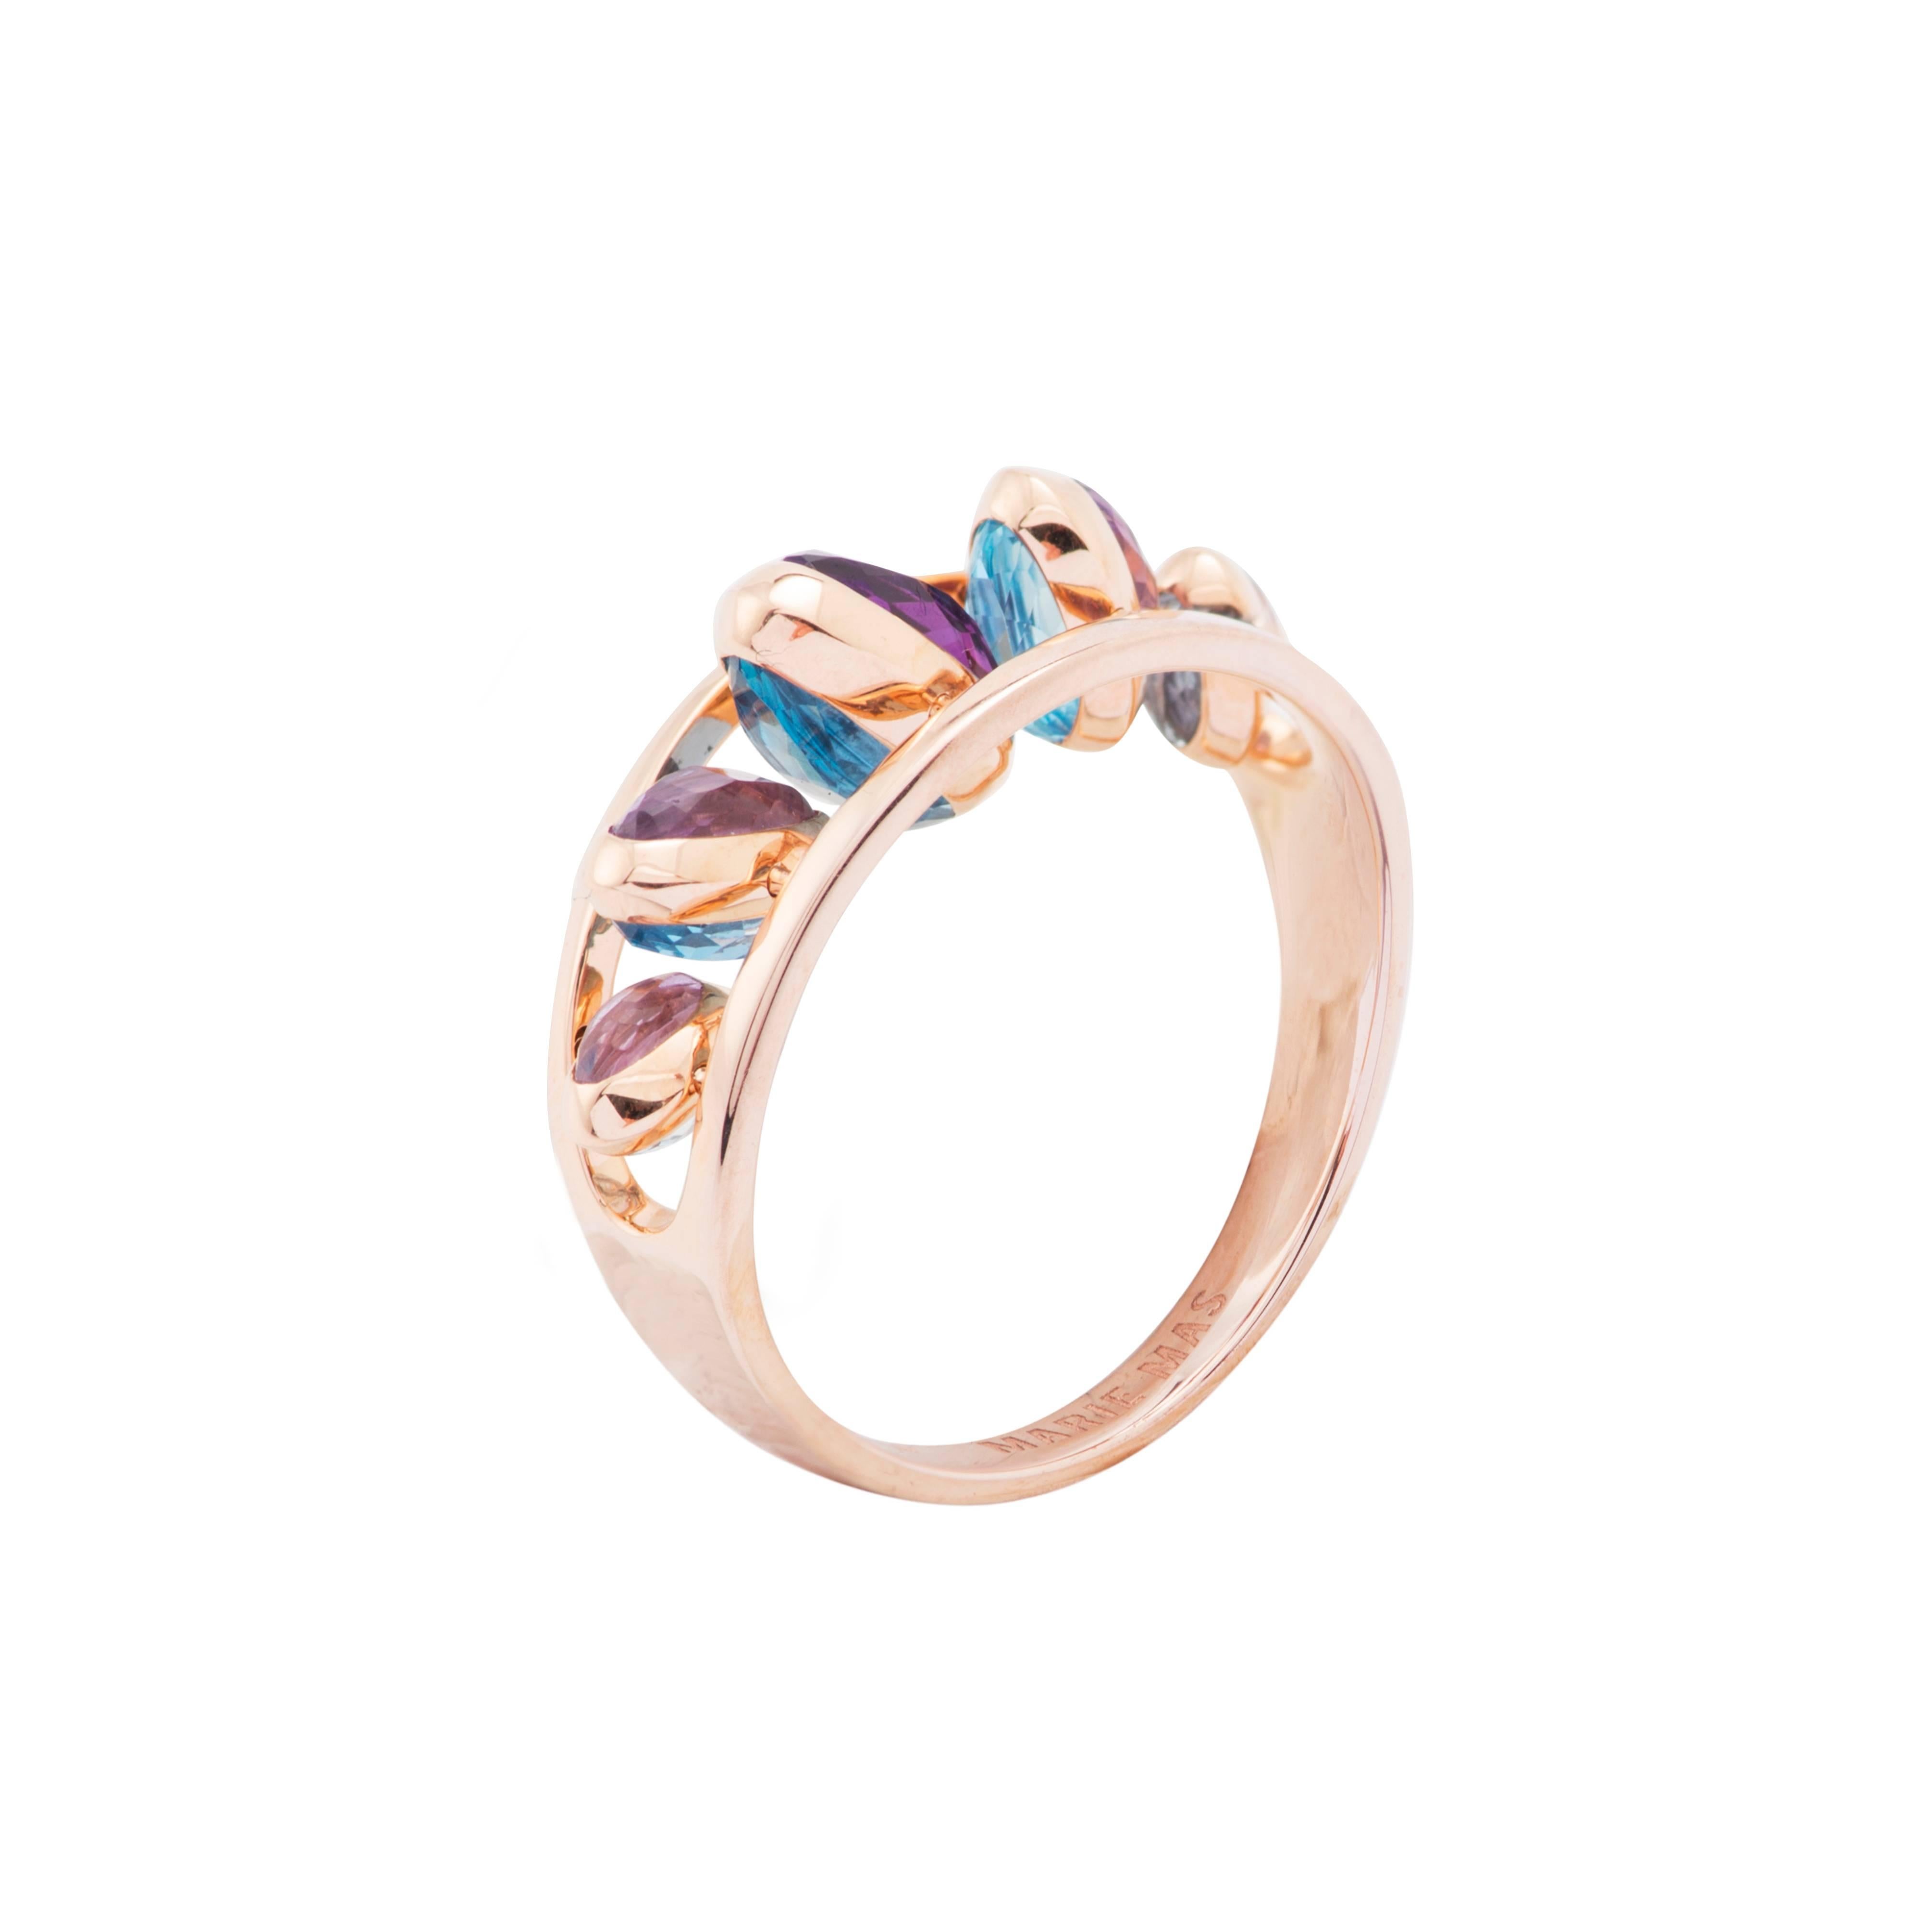 This Dancing Ring from the French Jewelry brand Marie Mas, is made in 18 Karat Rose Gold. All the stones can move like dominos, from one side to the other, from a shade of blue to a shade of purple. You can turn them to choose the side you want to